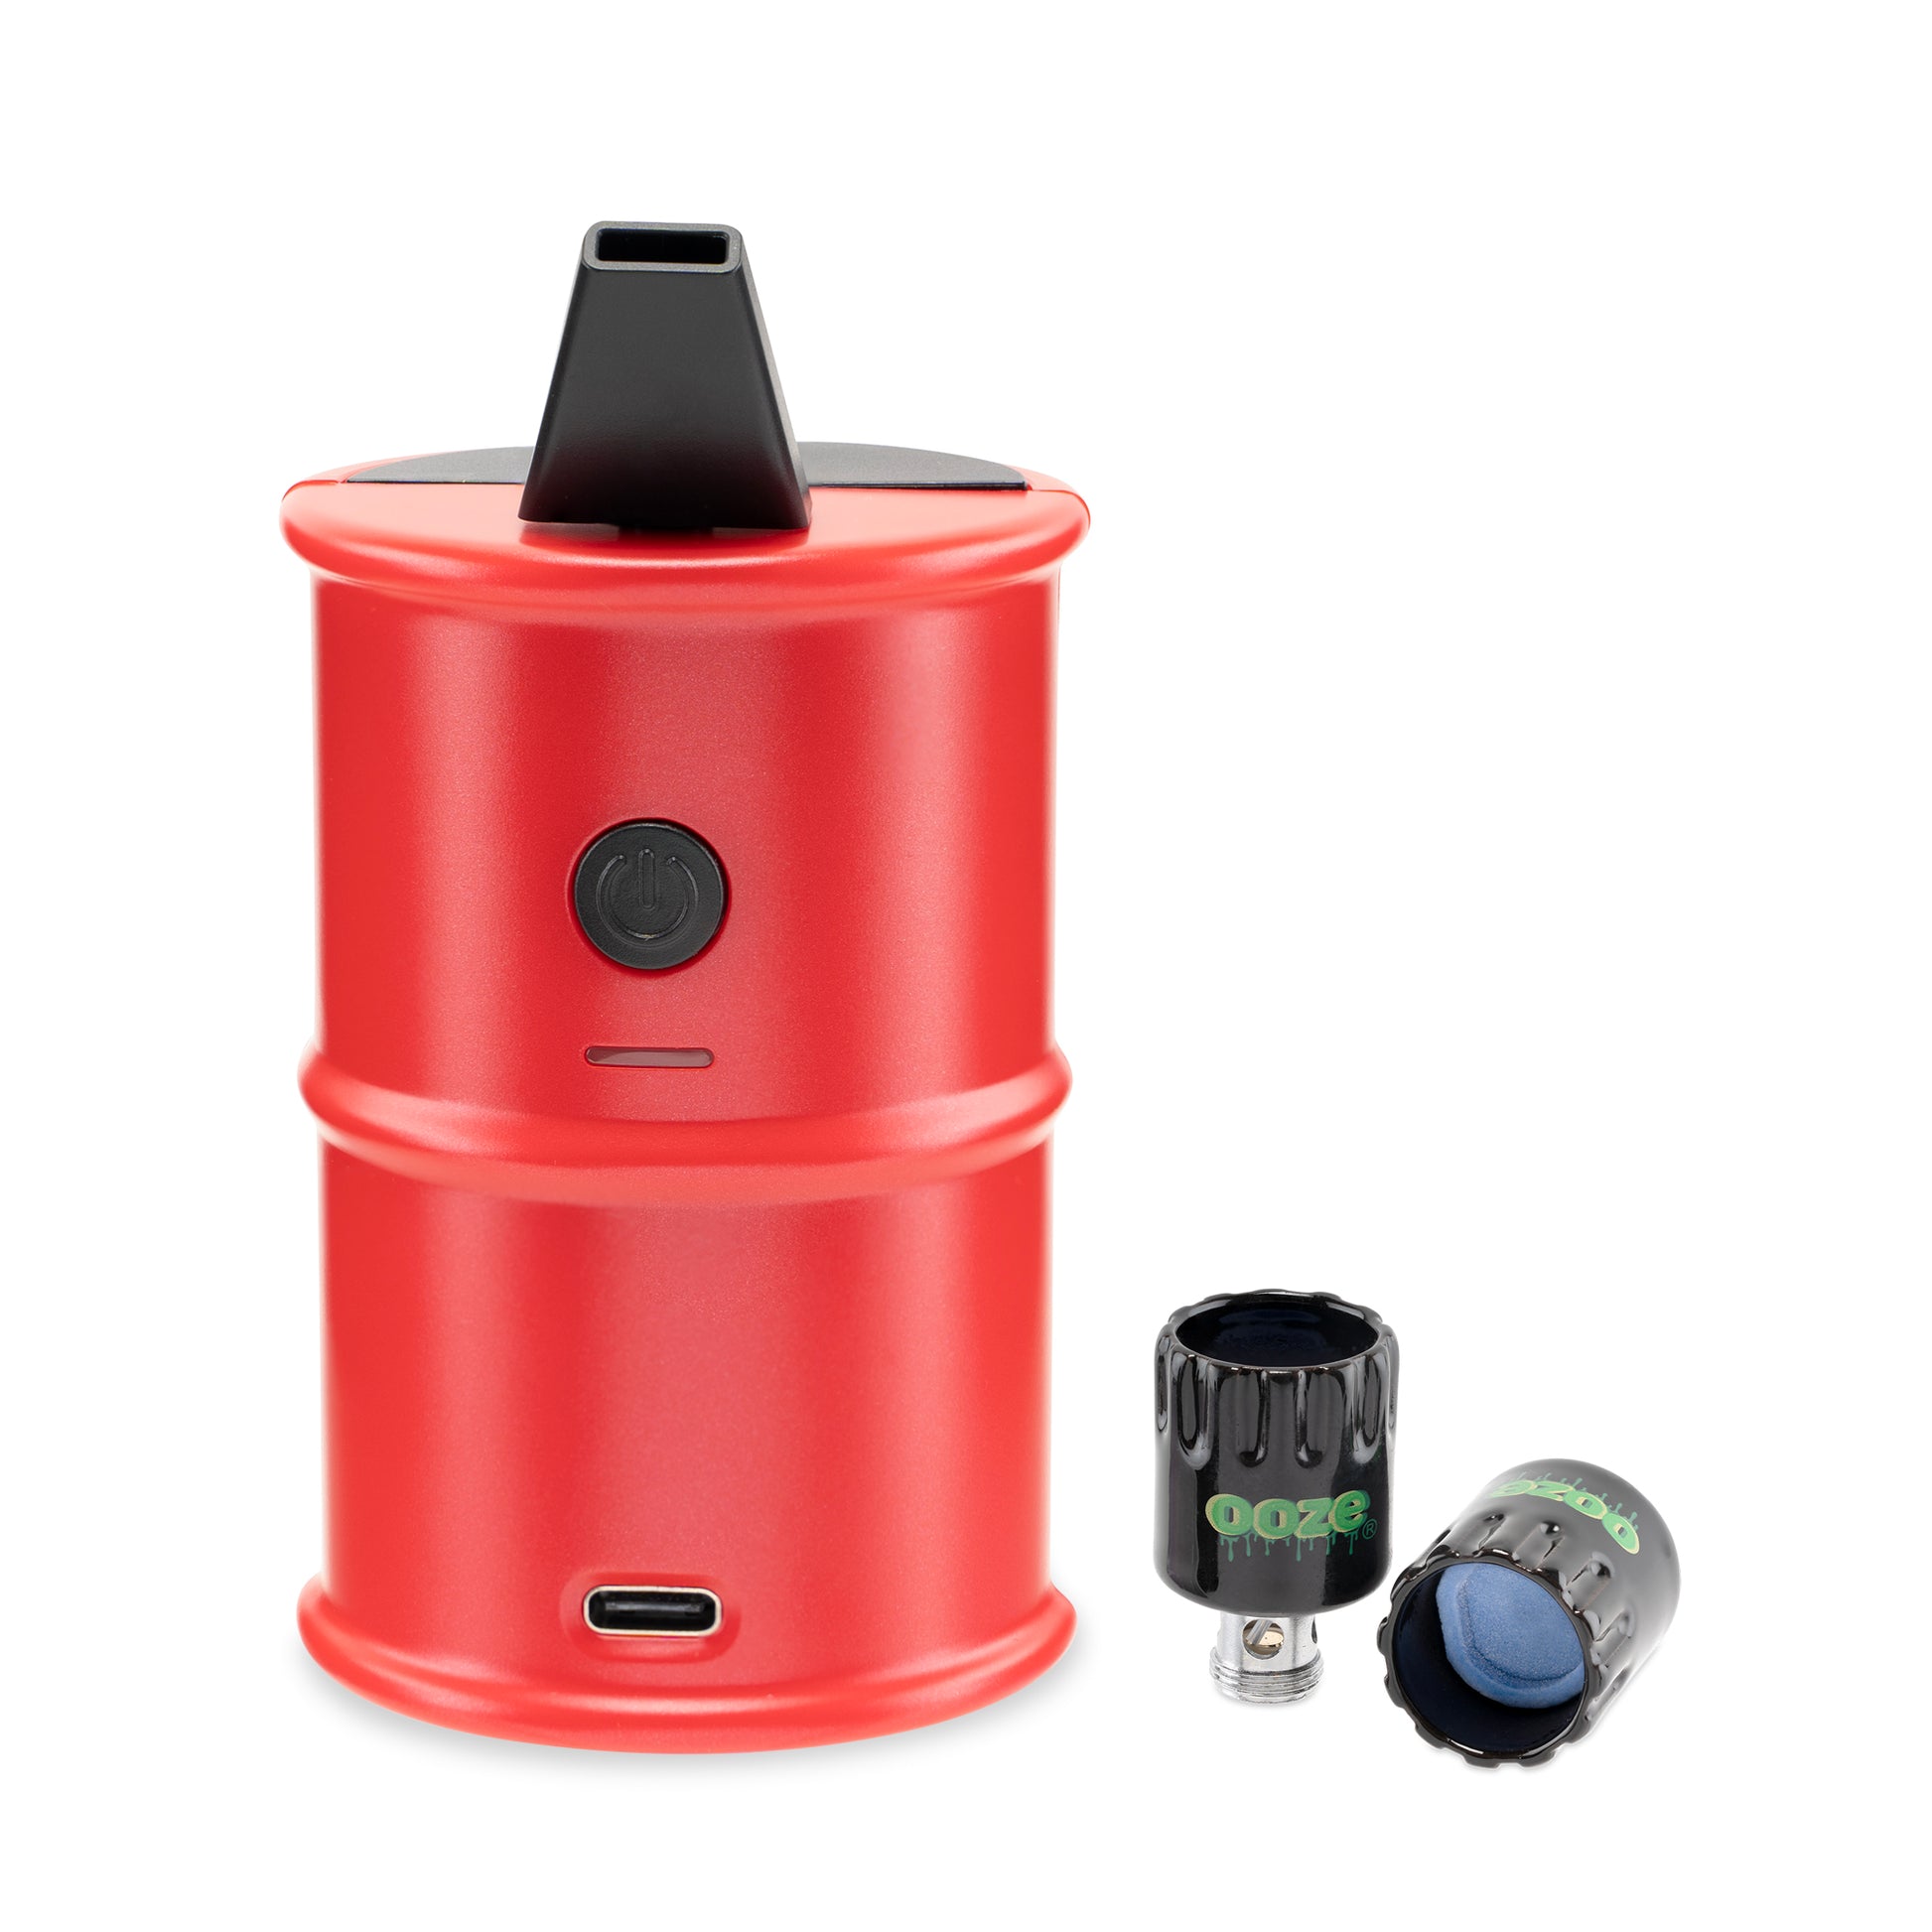 The Ruby Red Ooze Electro Barrel E-Rig is shown facing forward with the 2 replacement Onyx Atomizers to the right.